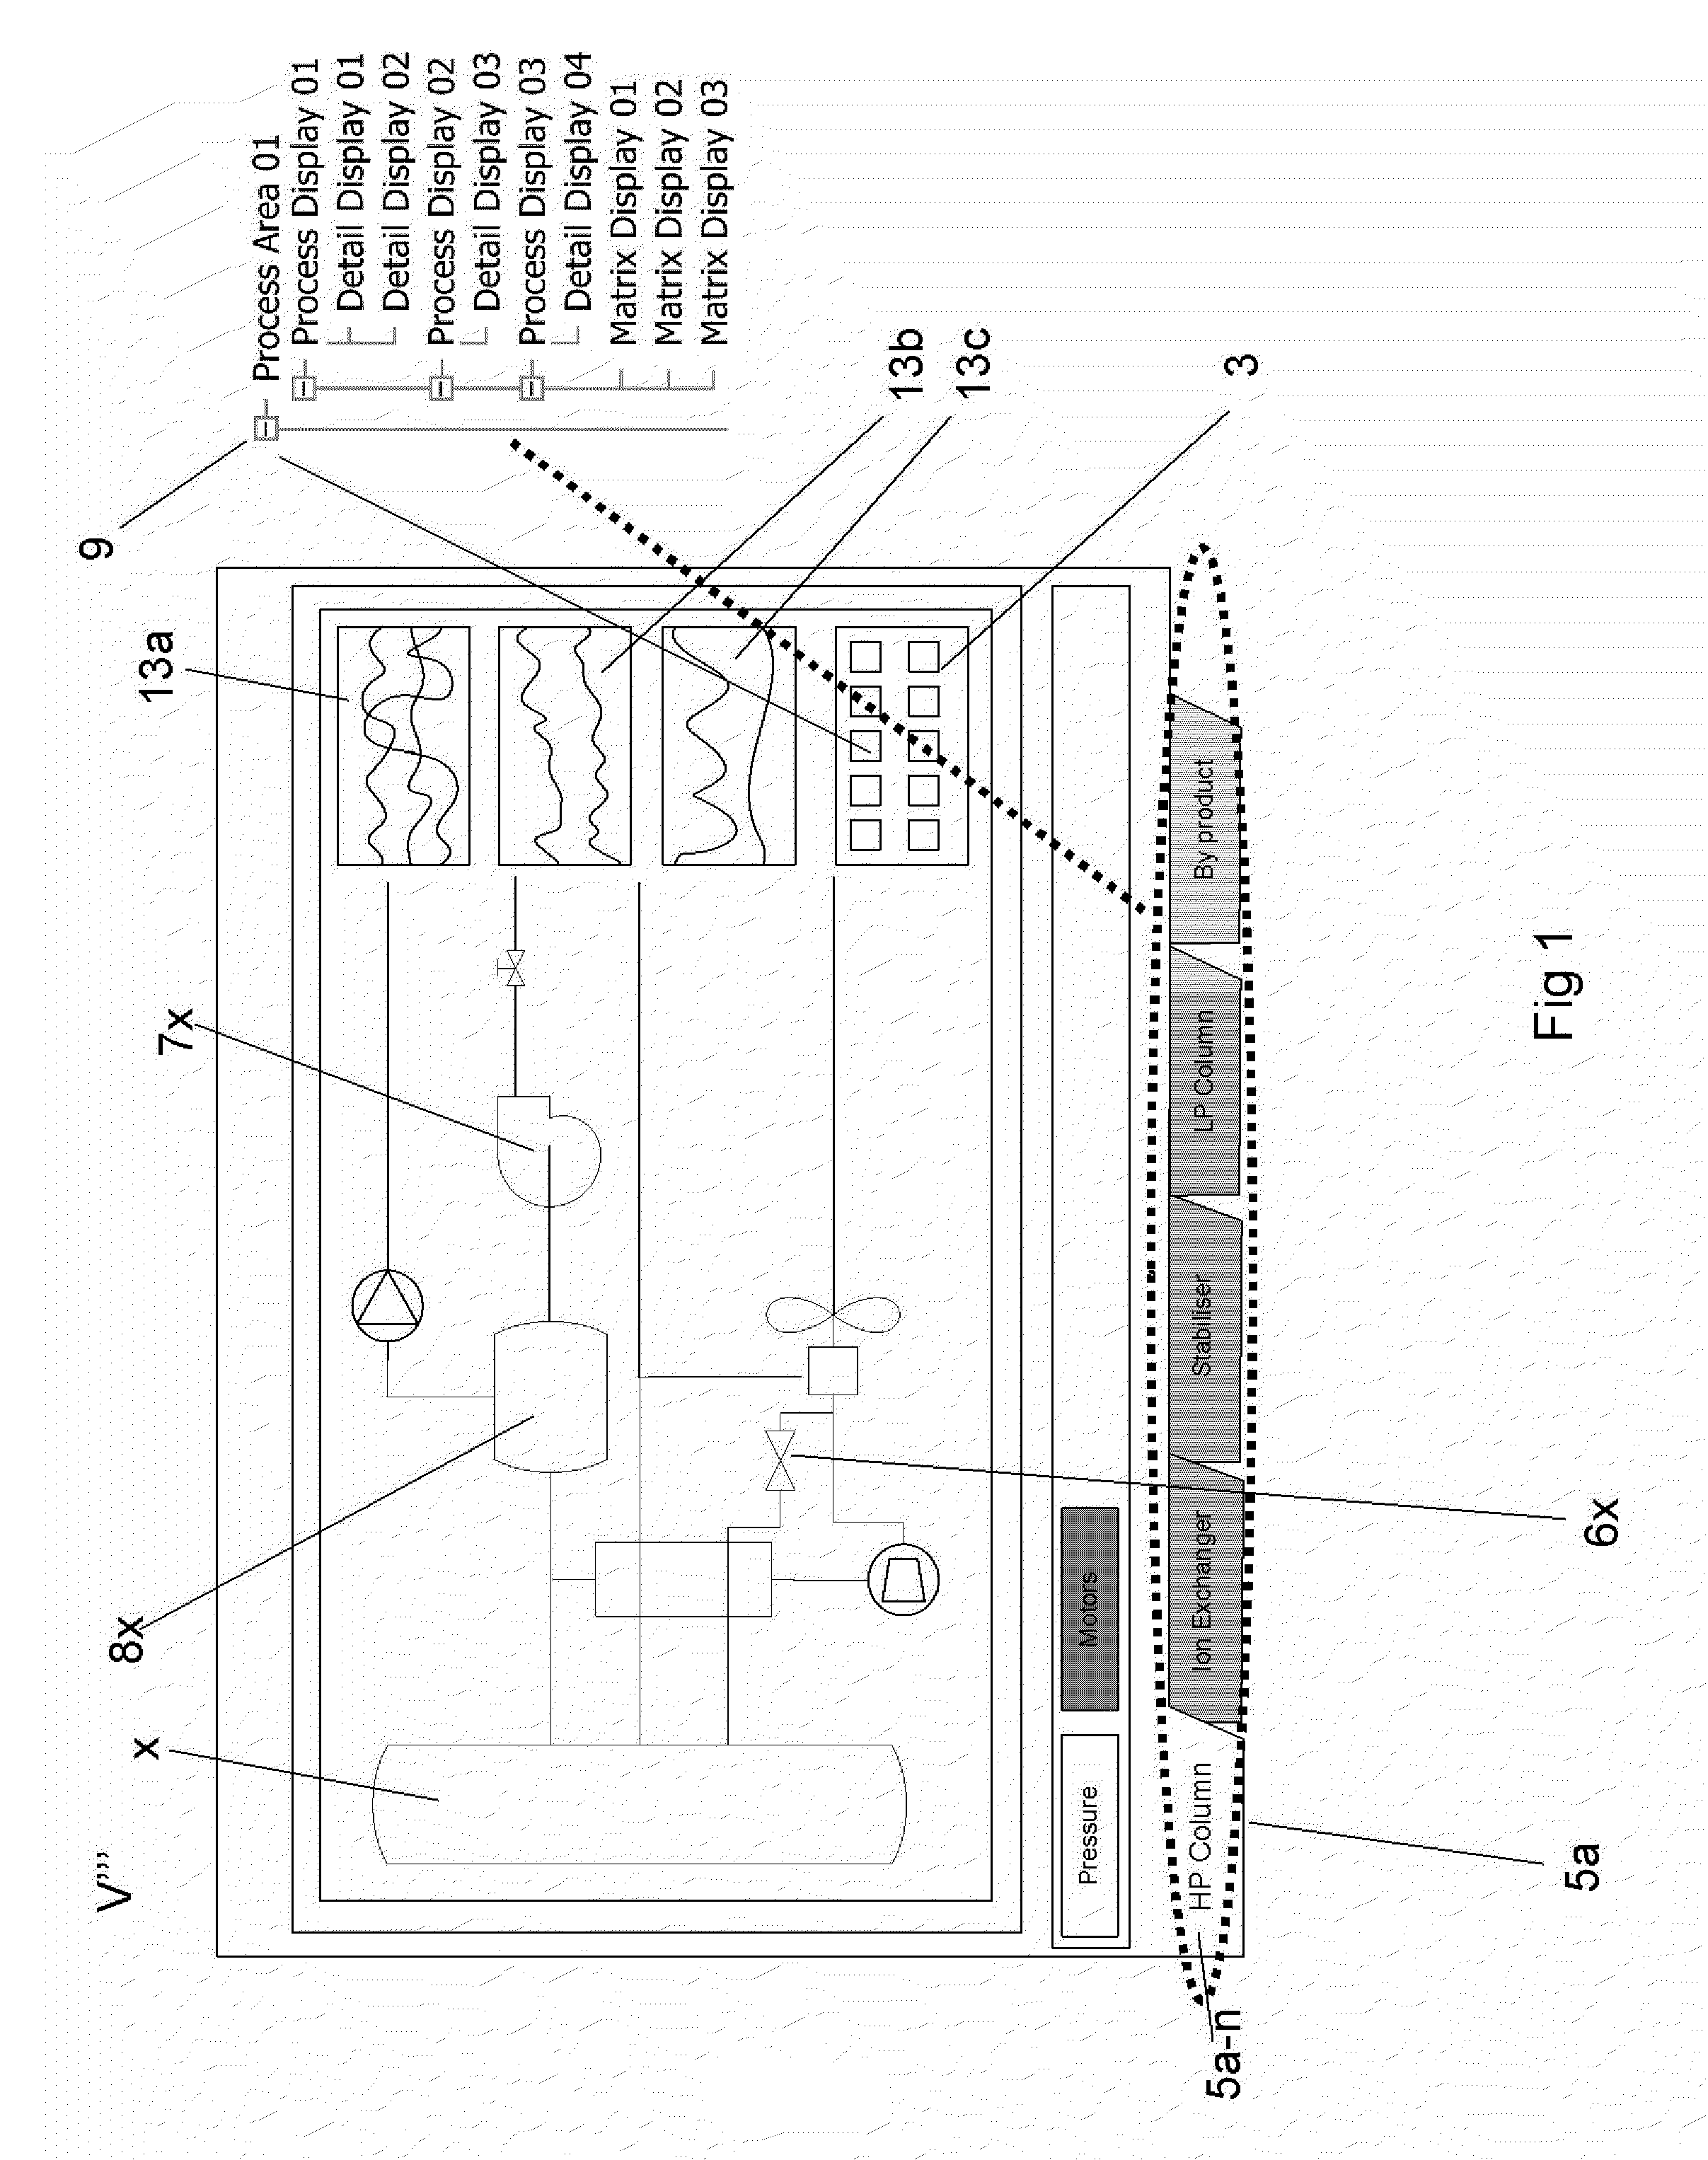 Method And System For Generating A Control System User Interface